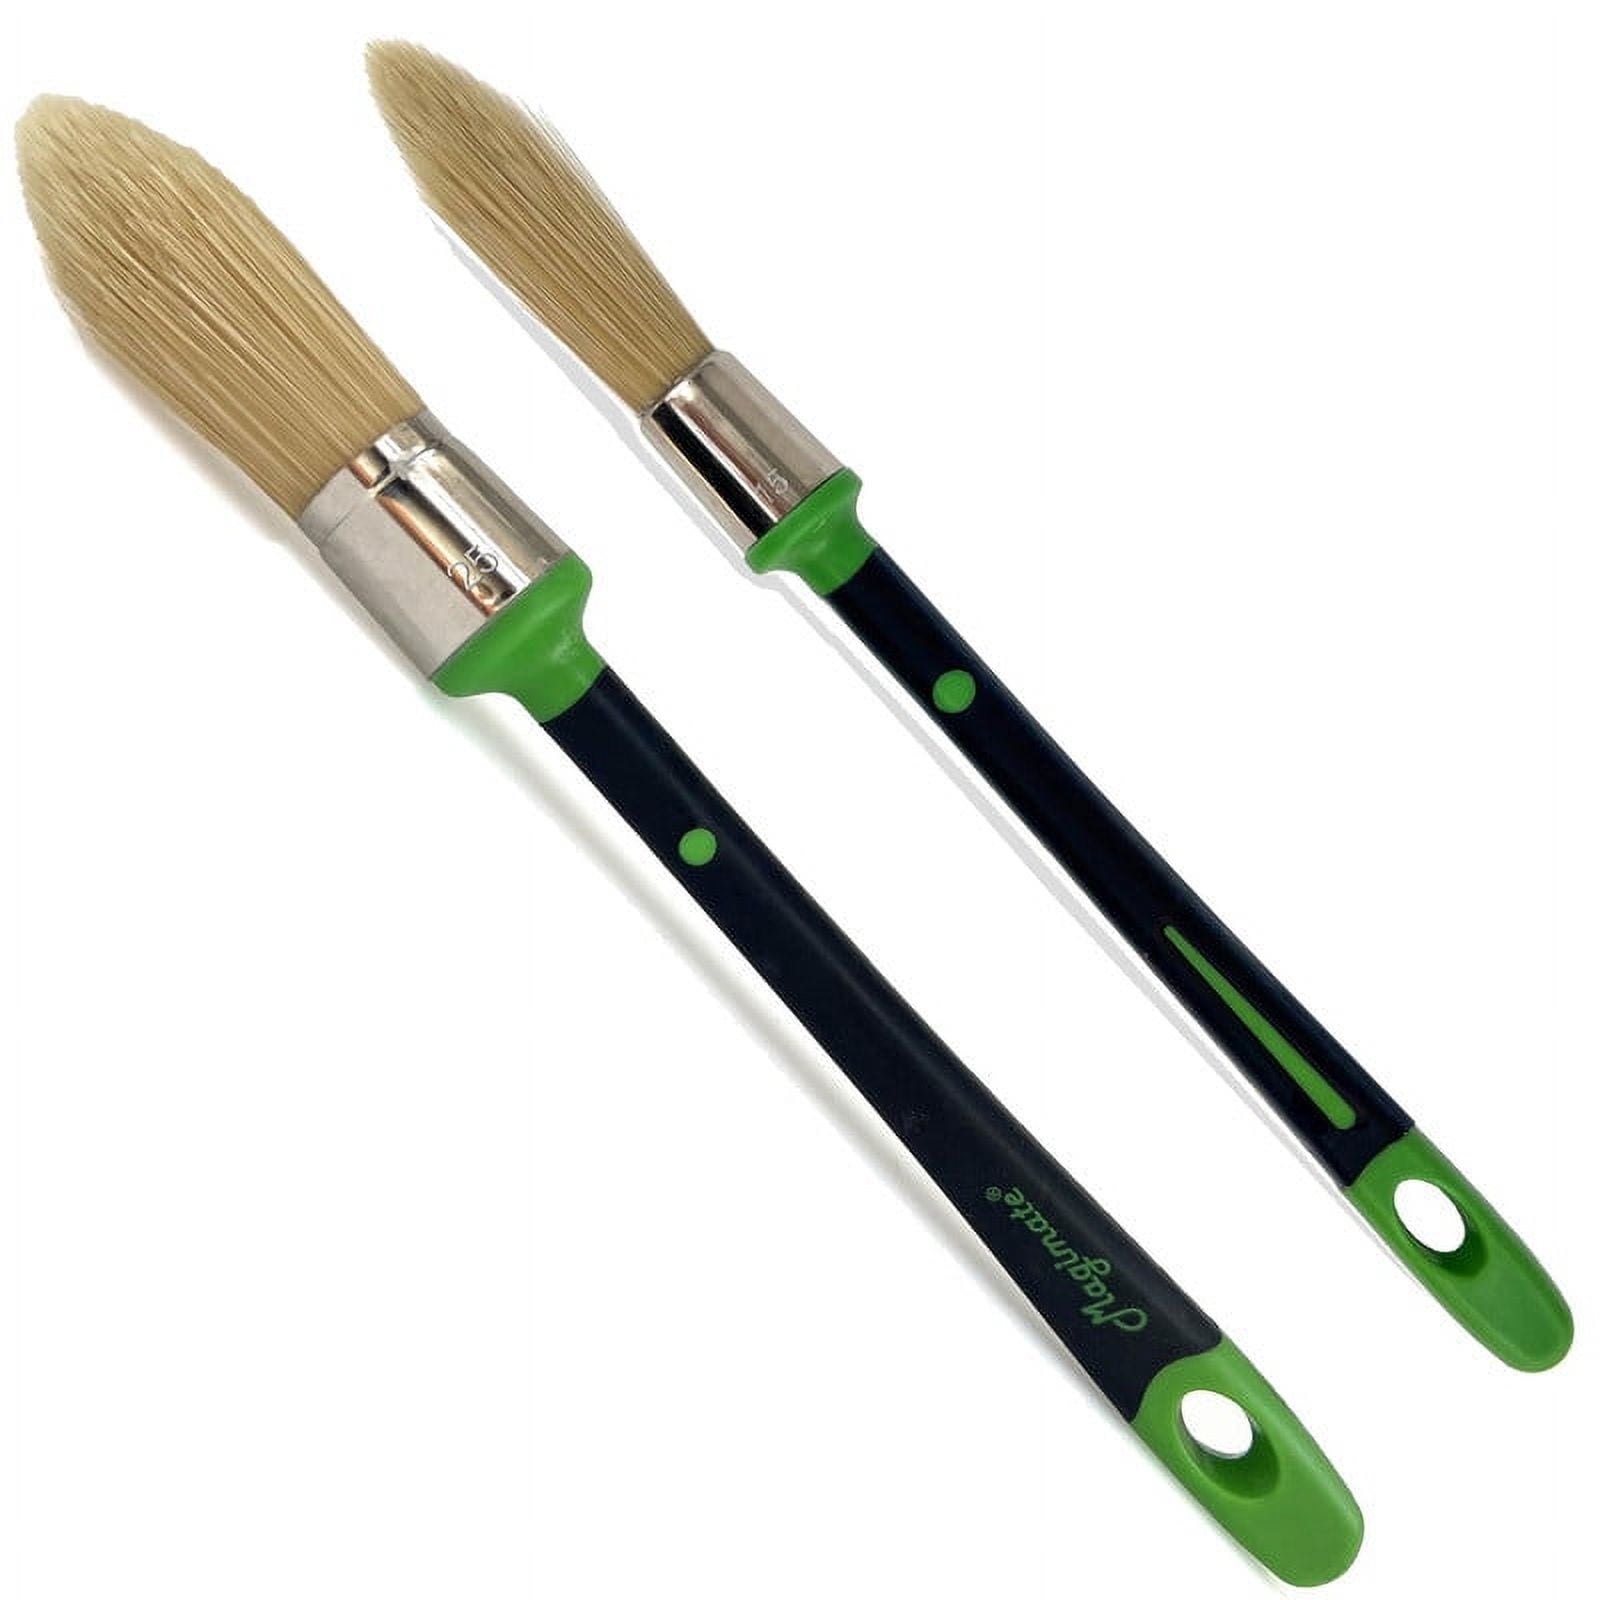 4 Pieces Trim Paint Brush Edge Painting Tool with Wooden Handle Painting  Tool Round Small Trim Brush Corner Paint Brush for Sash Baseboards House  Wall